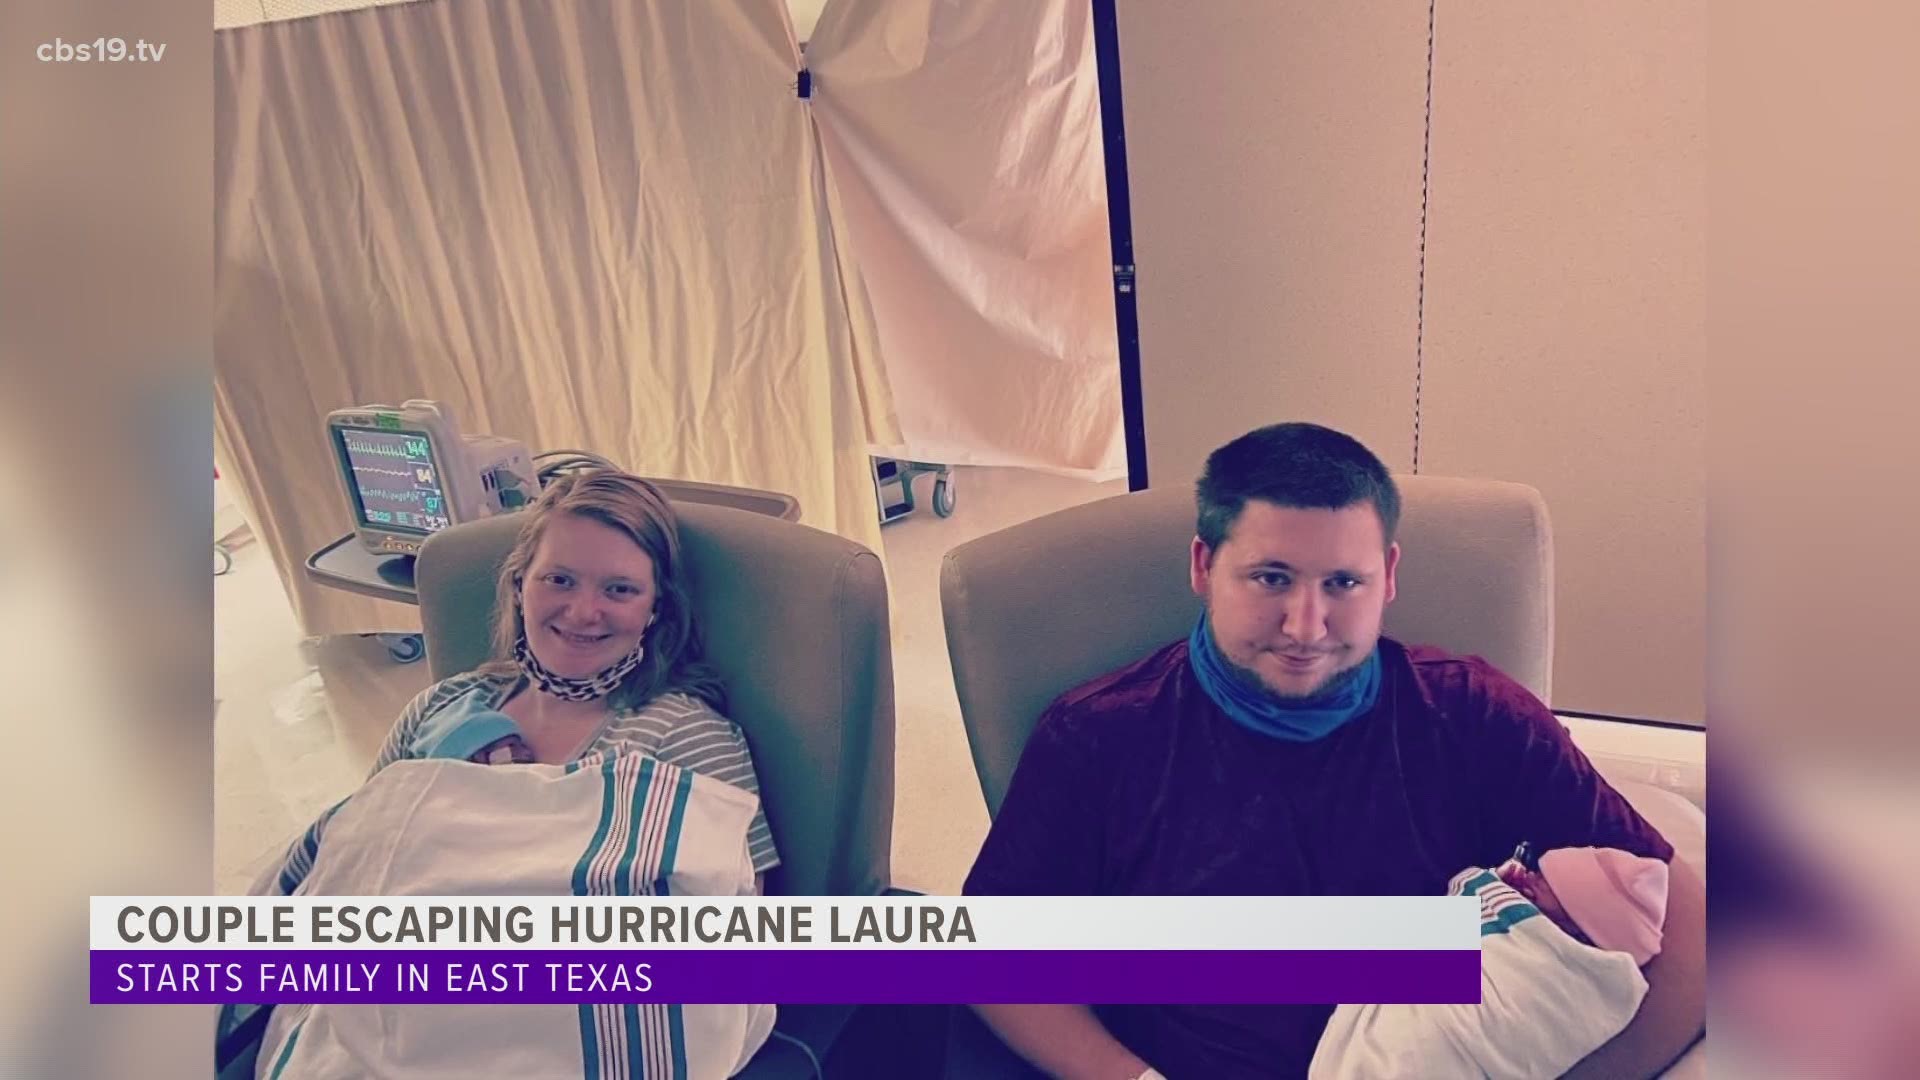 The pregnant couple from Silsbee traveled to Marshall to avoid the storm. Shortly after arriving, they welcomed twins into the world.